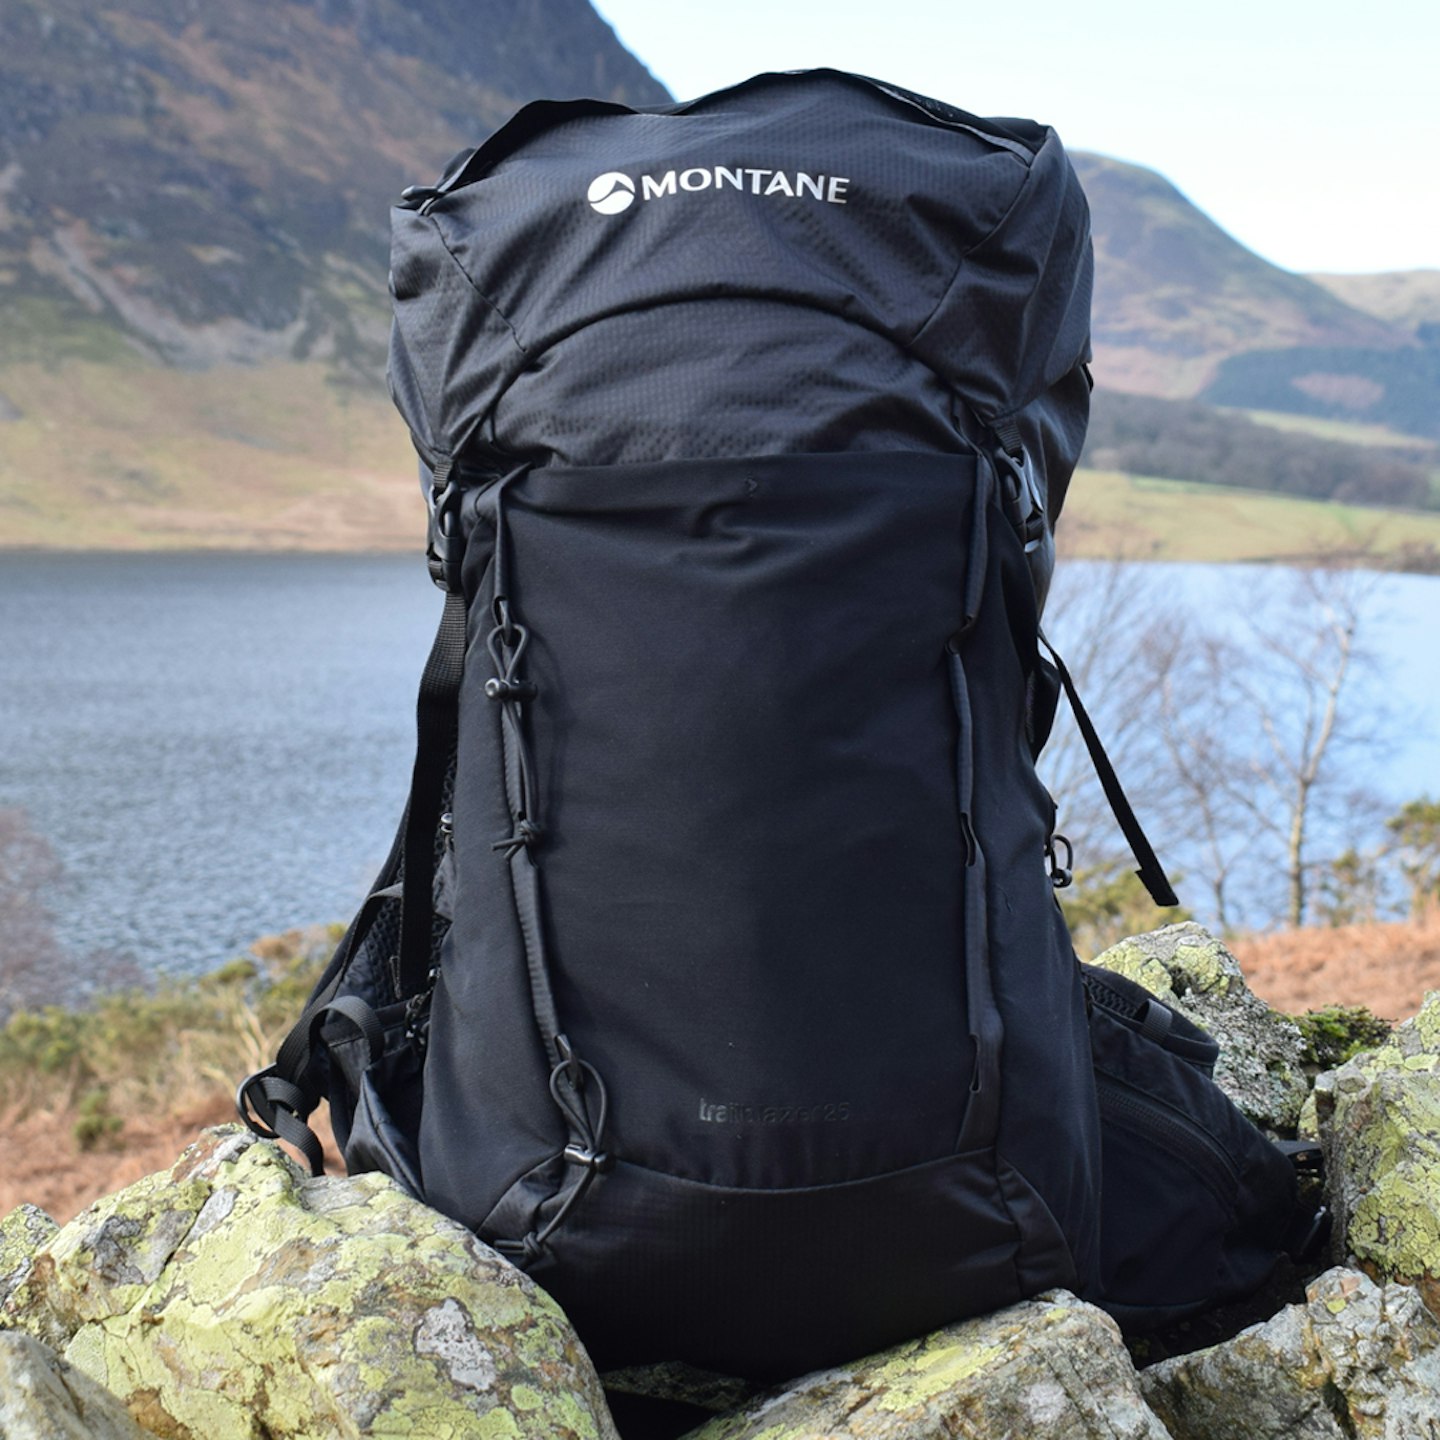 montane trailblazer 25l hiking backpack shot for review by James Forrest